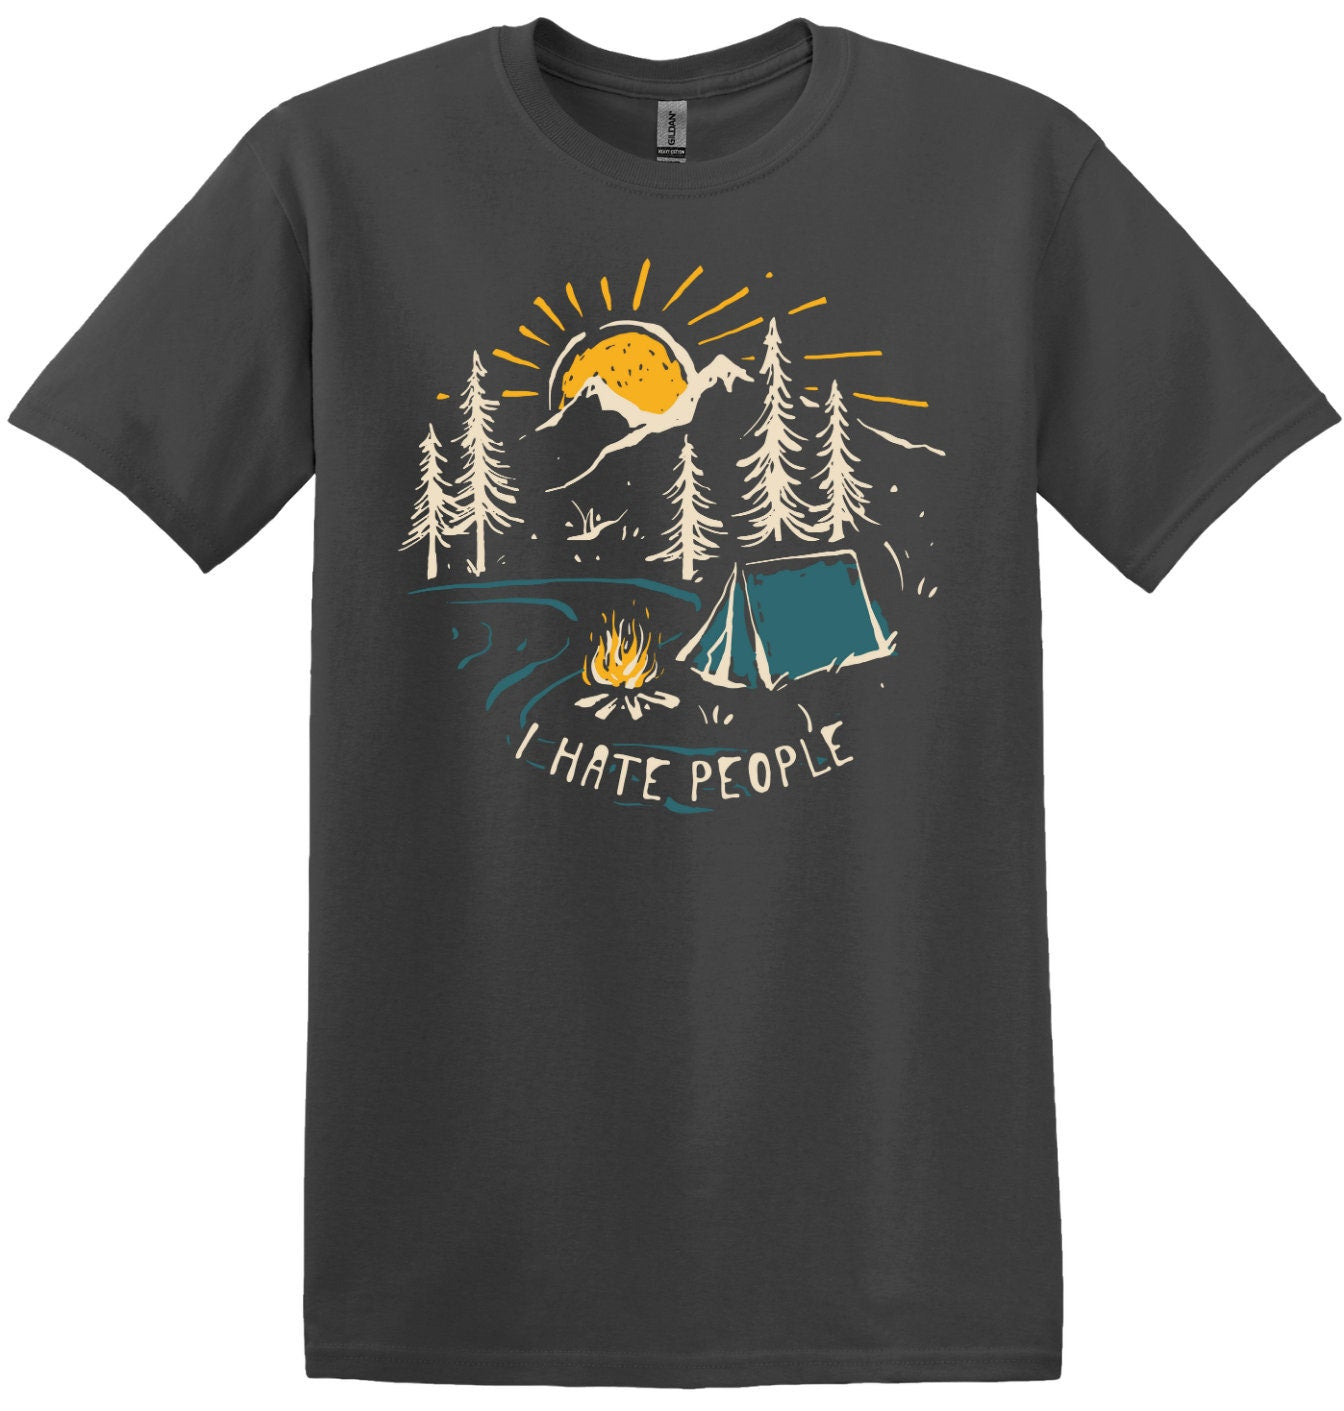 I Hate People, Outdoors Camping Short Sleeve Cotton Shirt, Women and Unisex Style Options, Adult Tee